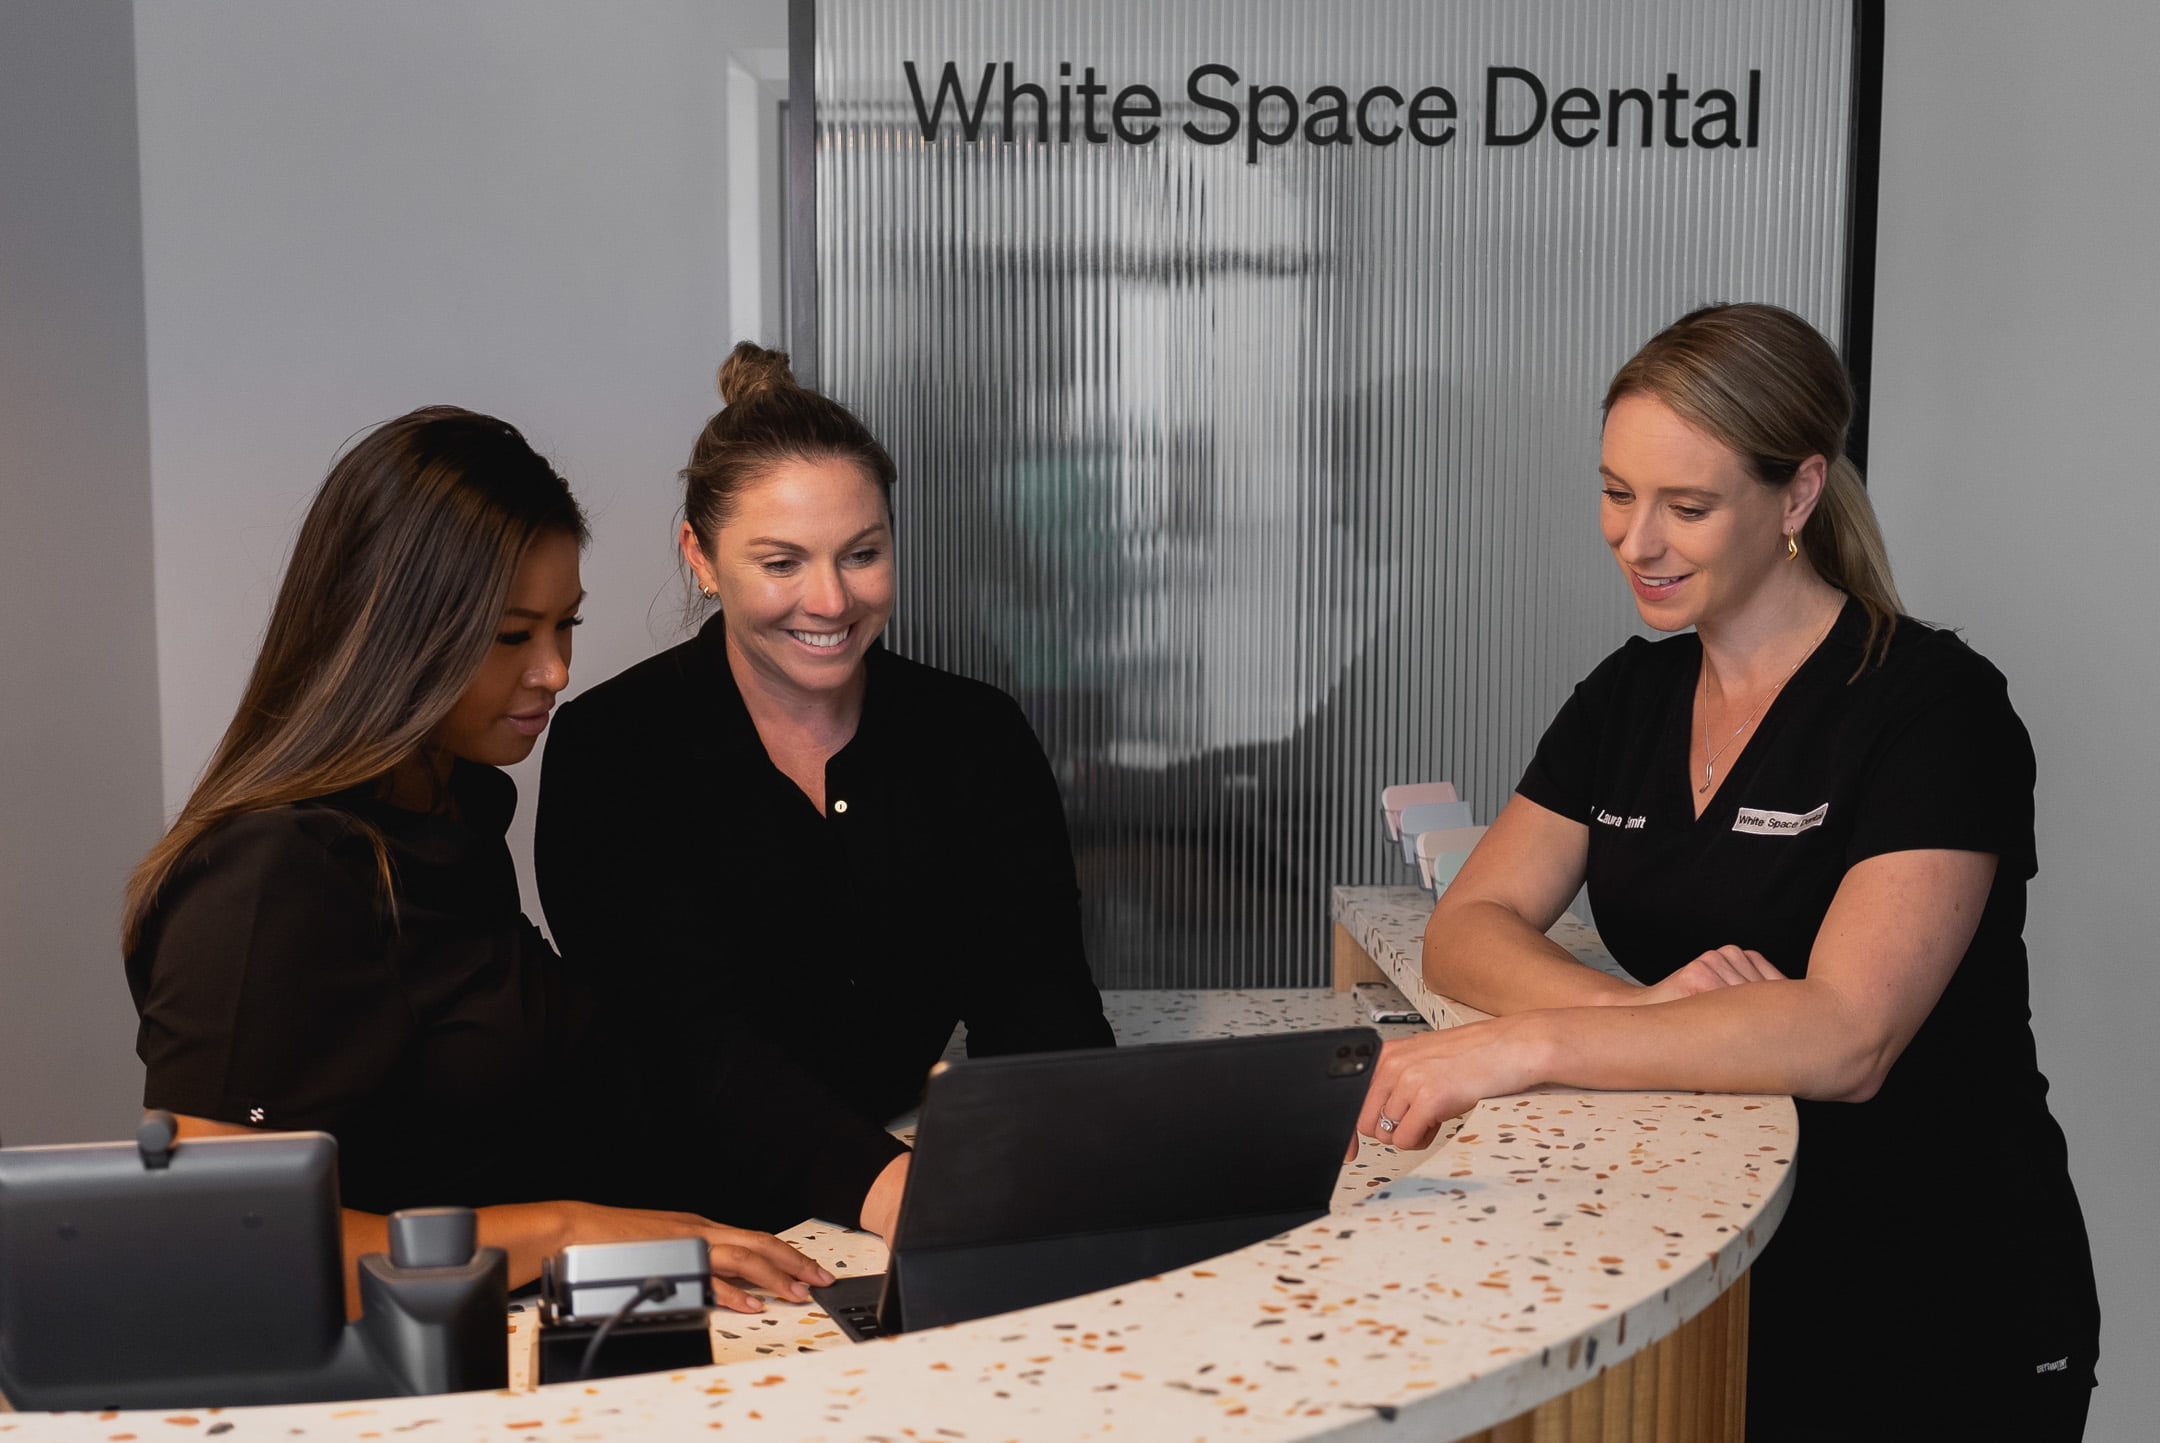 Contact us at White Space Dental